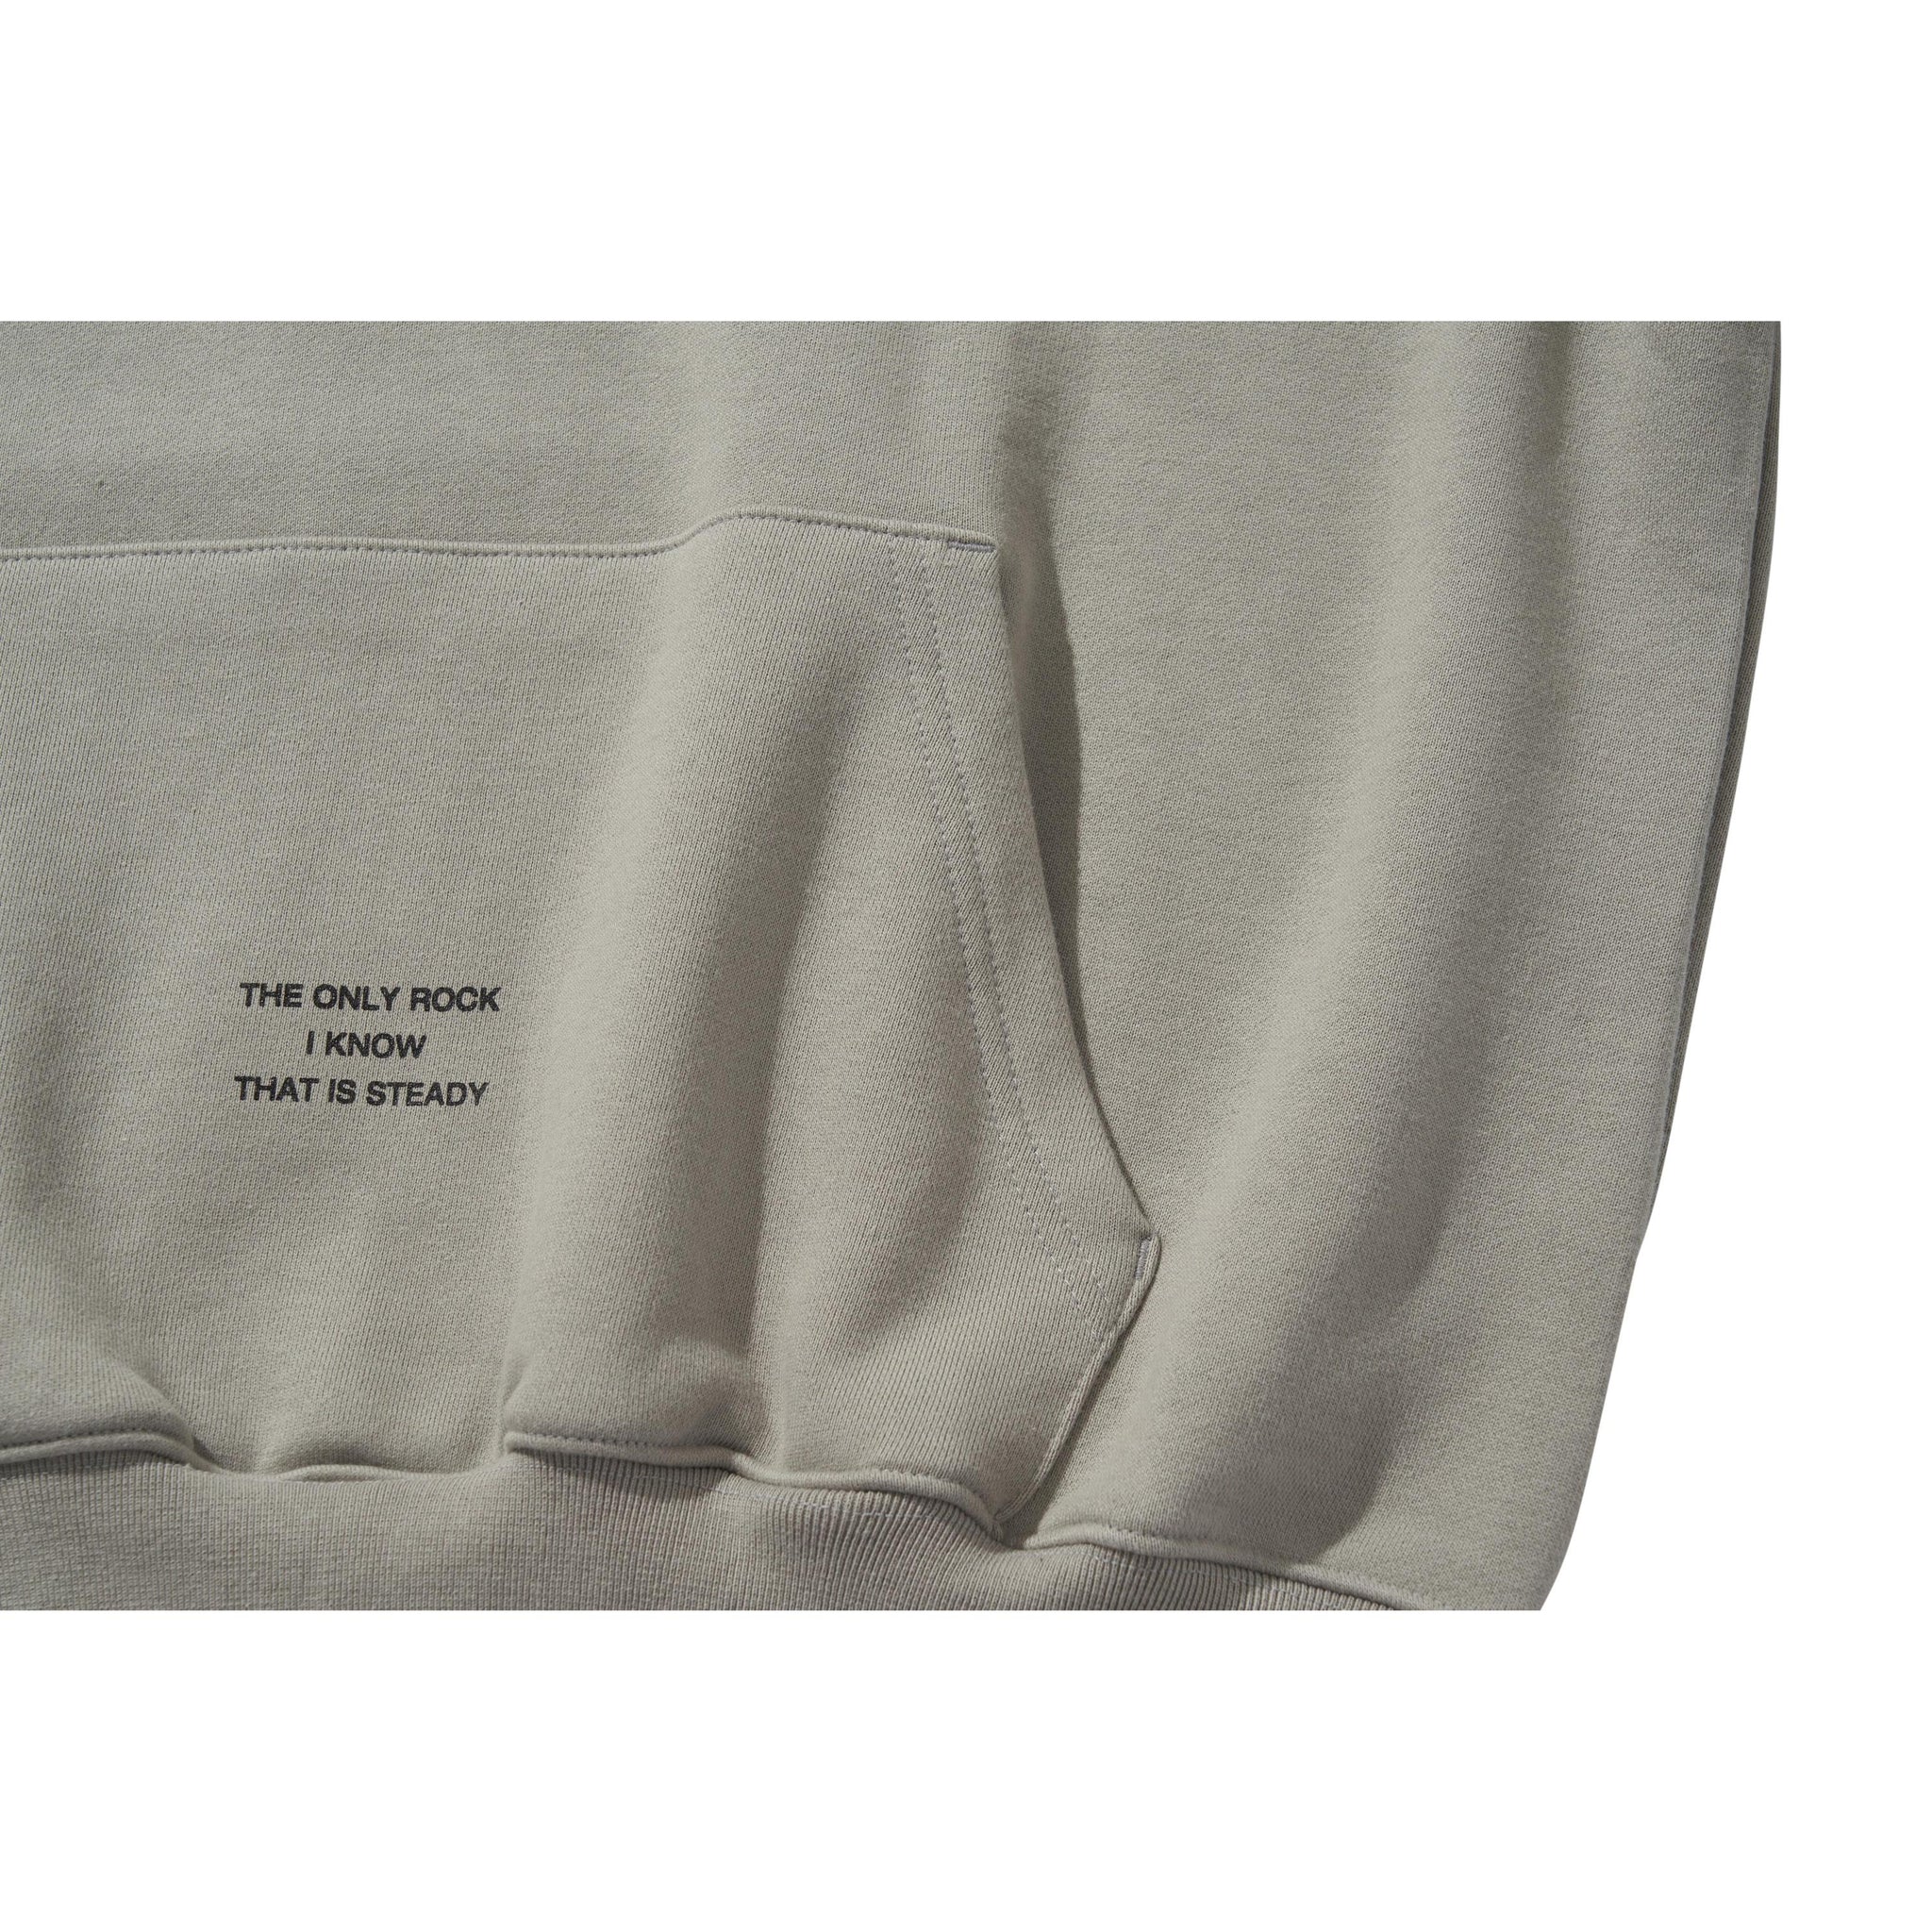 COUCH 2 HOODIE / STORM DUST